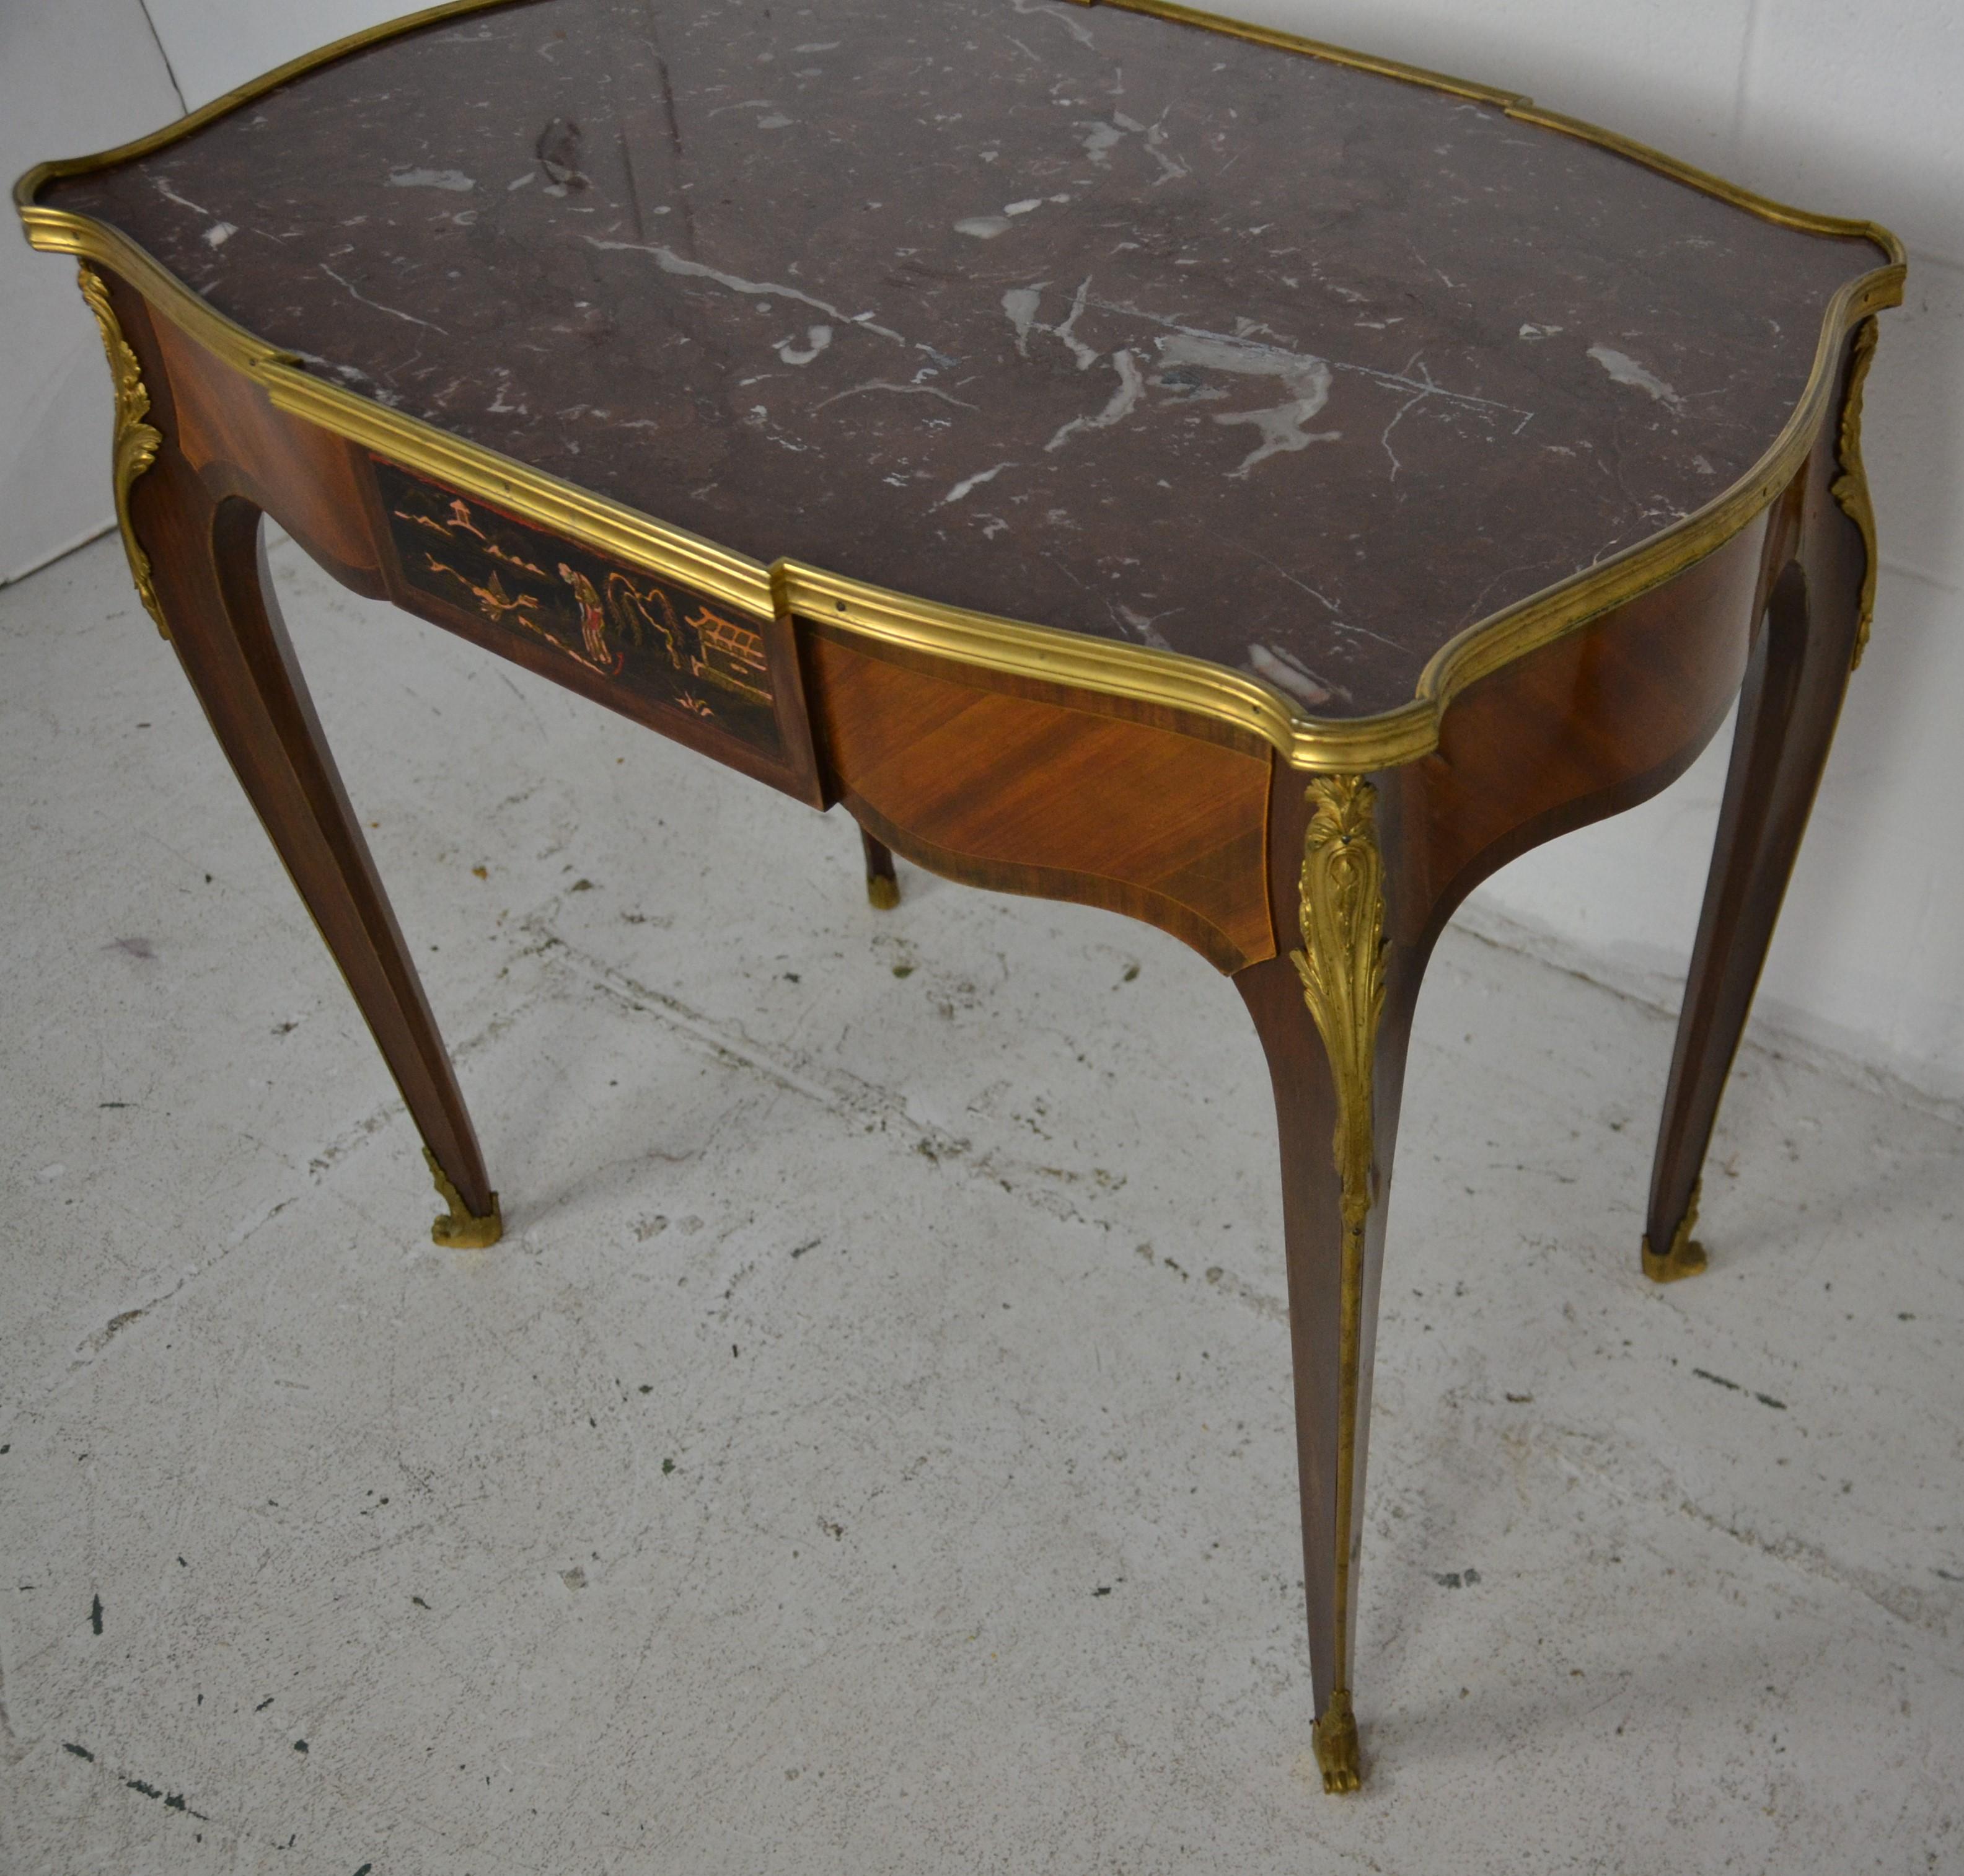 A French Desk in the Louis XVI style with an inset marble top surrounded by a polished brass / bronze edging. A full length drawer with painted Chinoiserie front. ( matching the reverse side) Gilt decorations to the legs with an Acanthus leaf